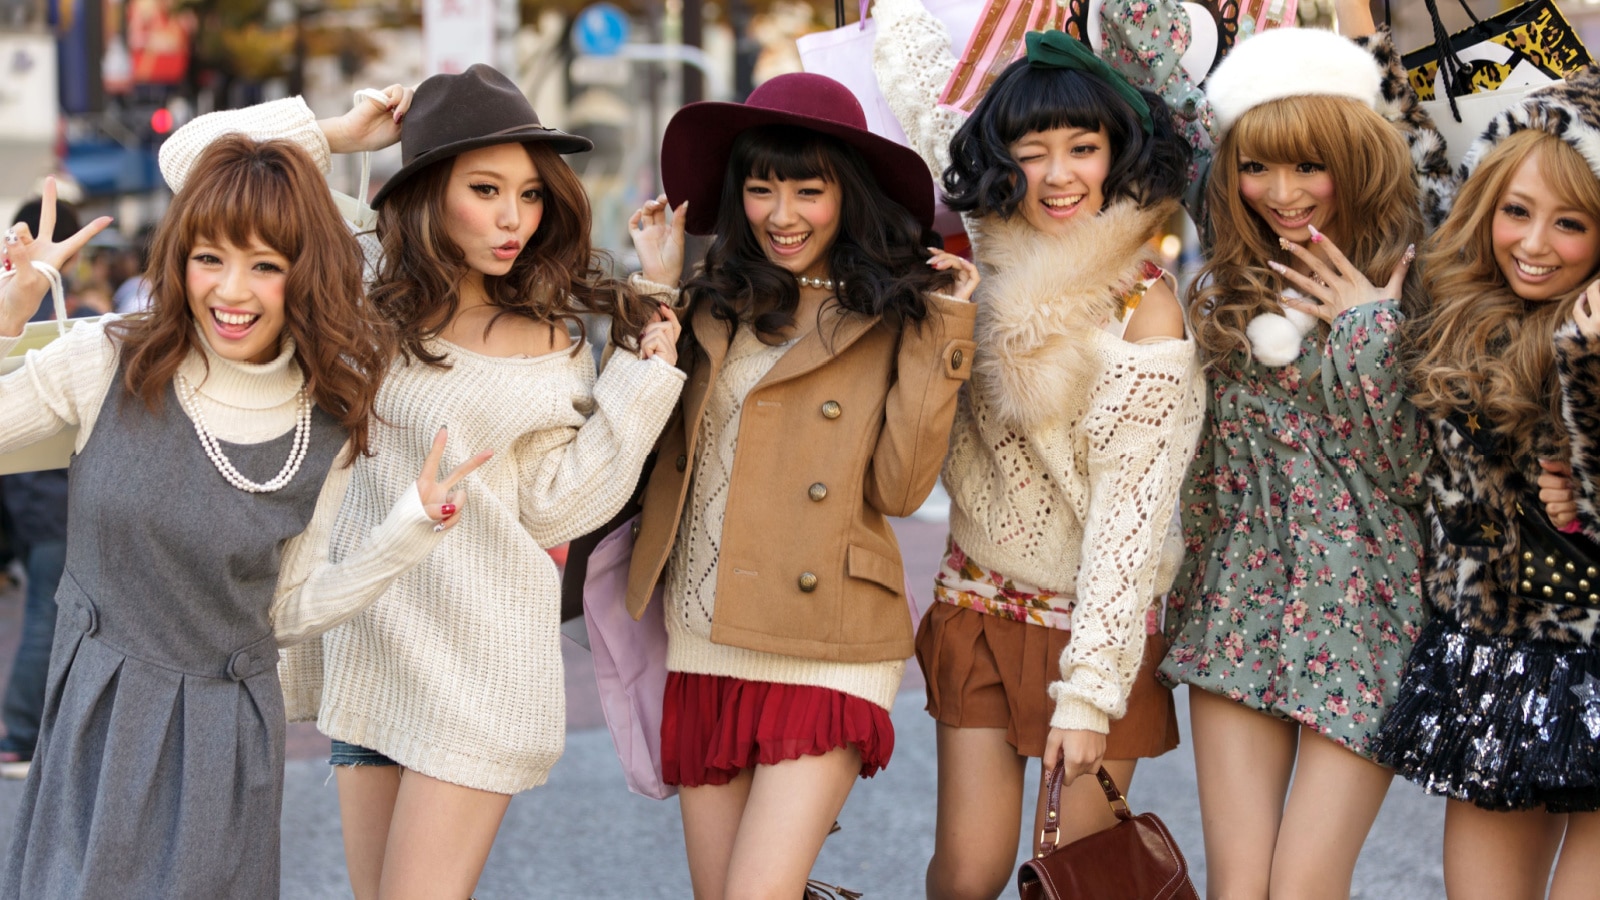 TOKYO,JAPAN, NOVEMBER 25, 2011 : A group of girls is posing in the middle of the street for fashion advertising in the street near the Shibuya crossroad in Tokyo, Japan.